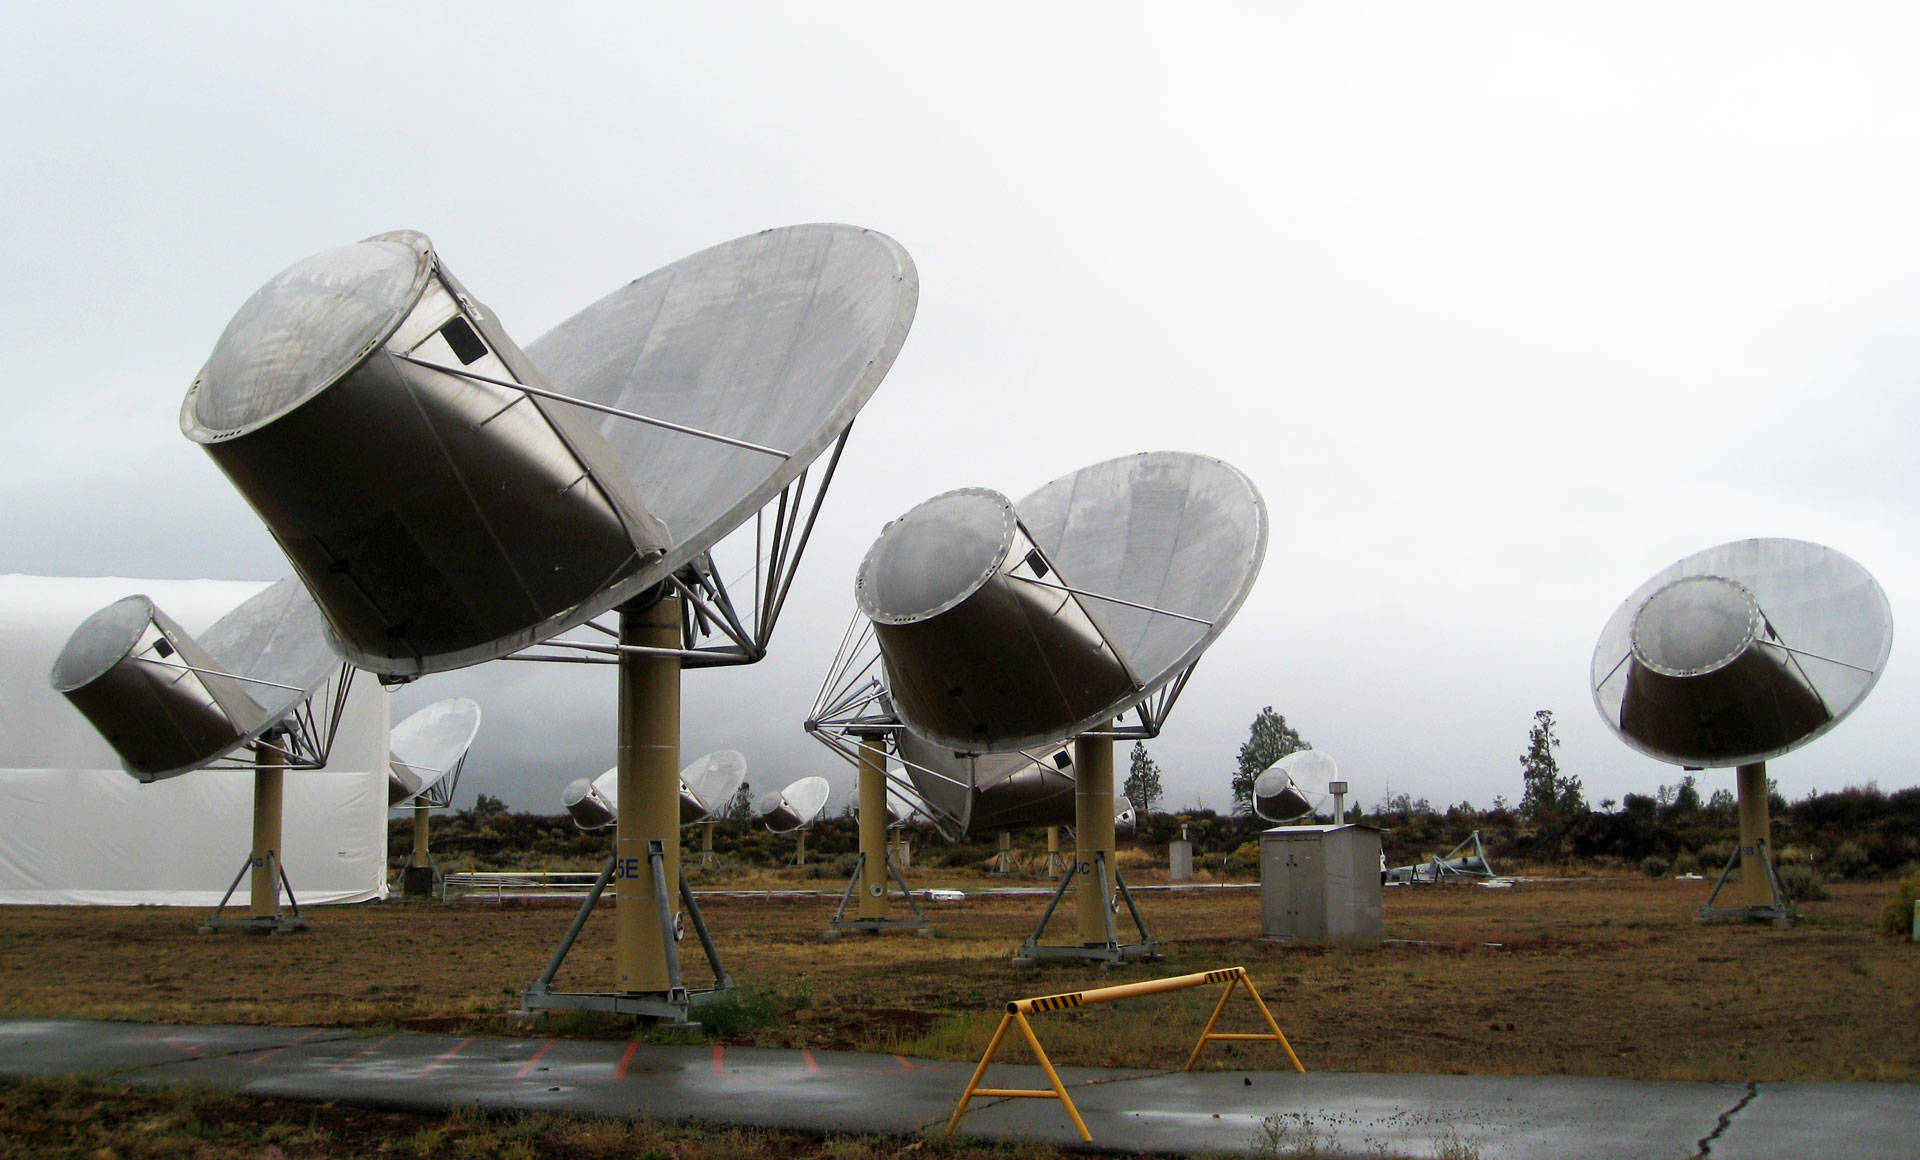 The SETI Institute’s Allen Telescope Array in Hat Creek has been turned toward HD 164595 since Sunday evening, looking for a repeat of the signal. J Brew/Flickr